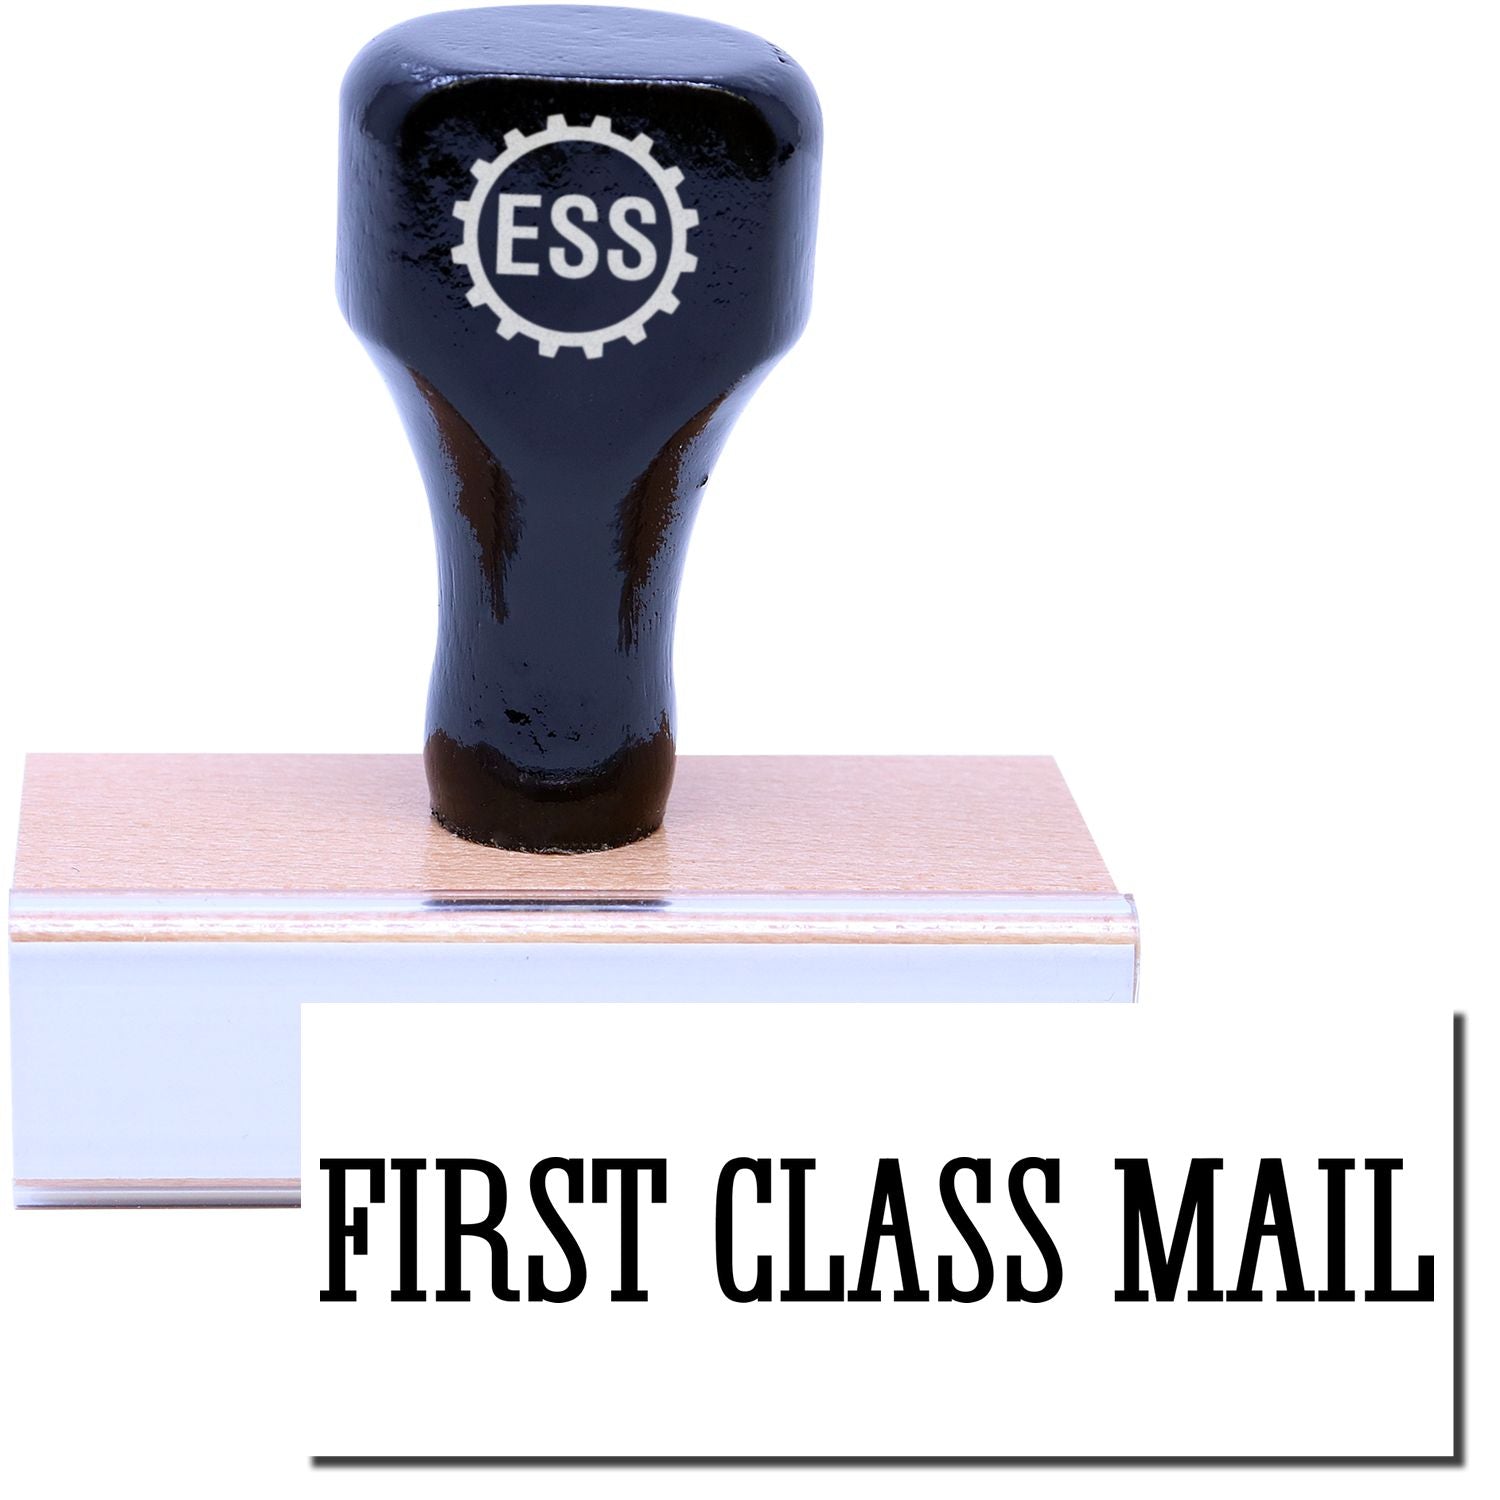 A stock office rubber stamp with a stamped image showing how the text "FIRST CLASS MAIL" in a large times font is displayed after stamping.